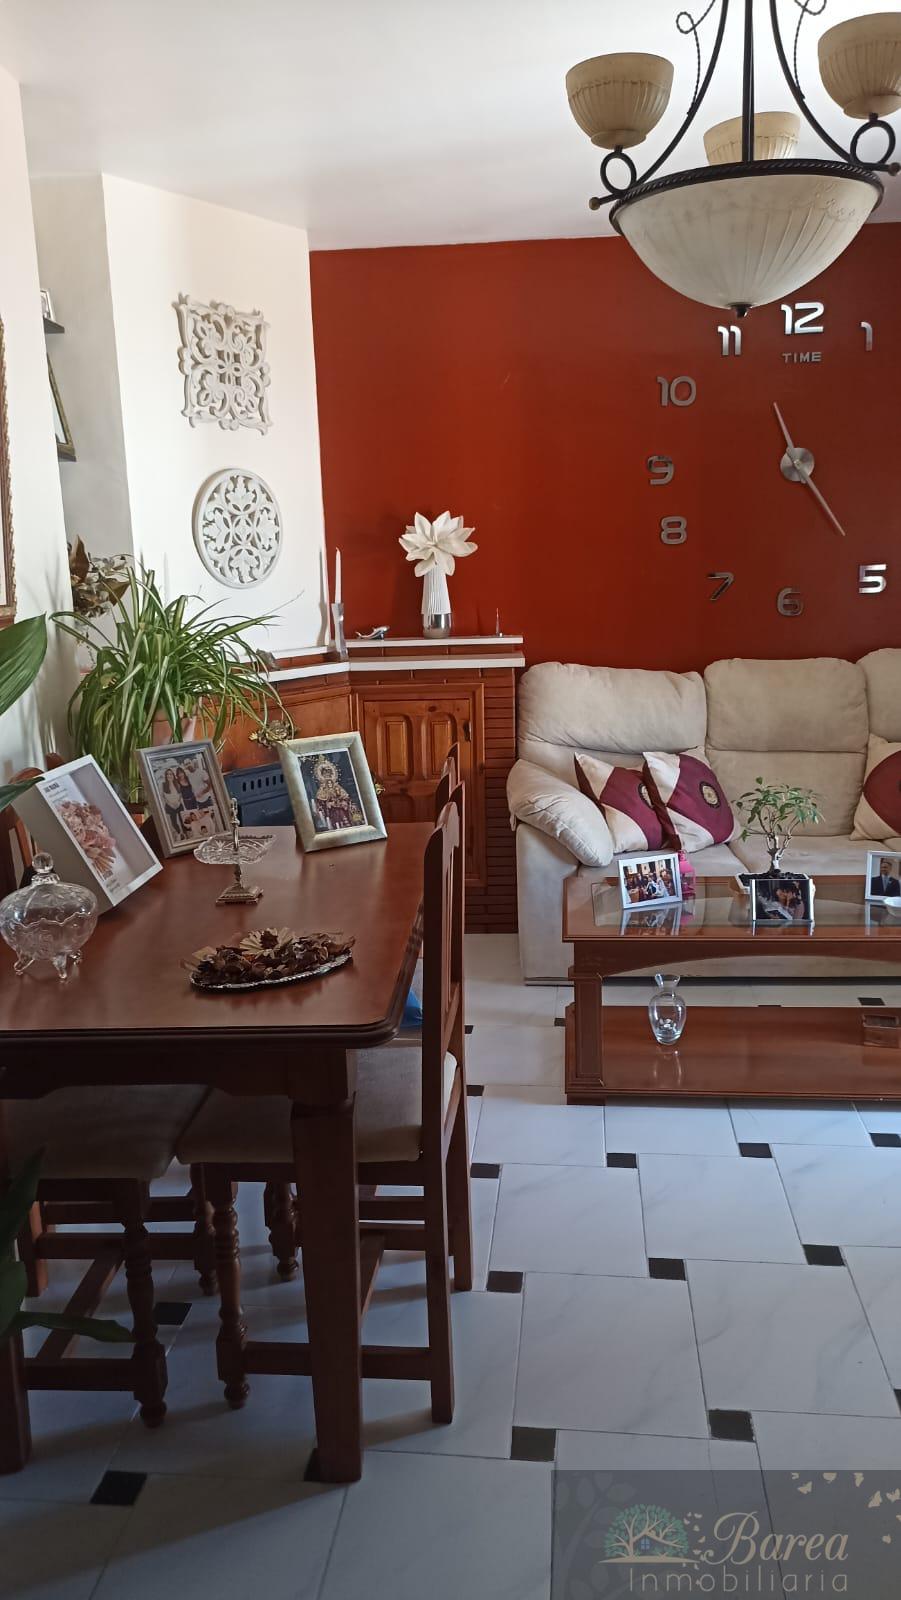 For sale of flat in Rute